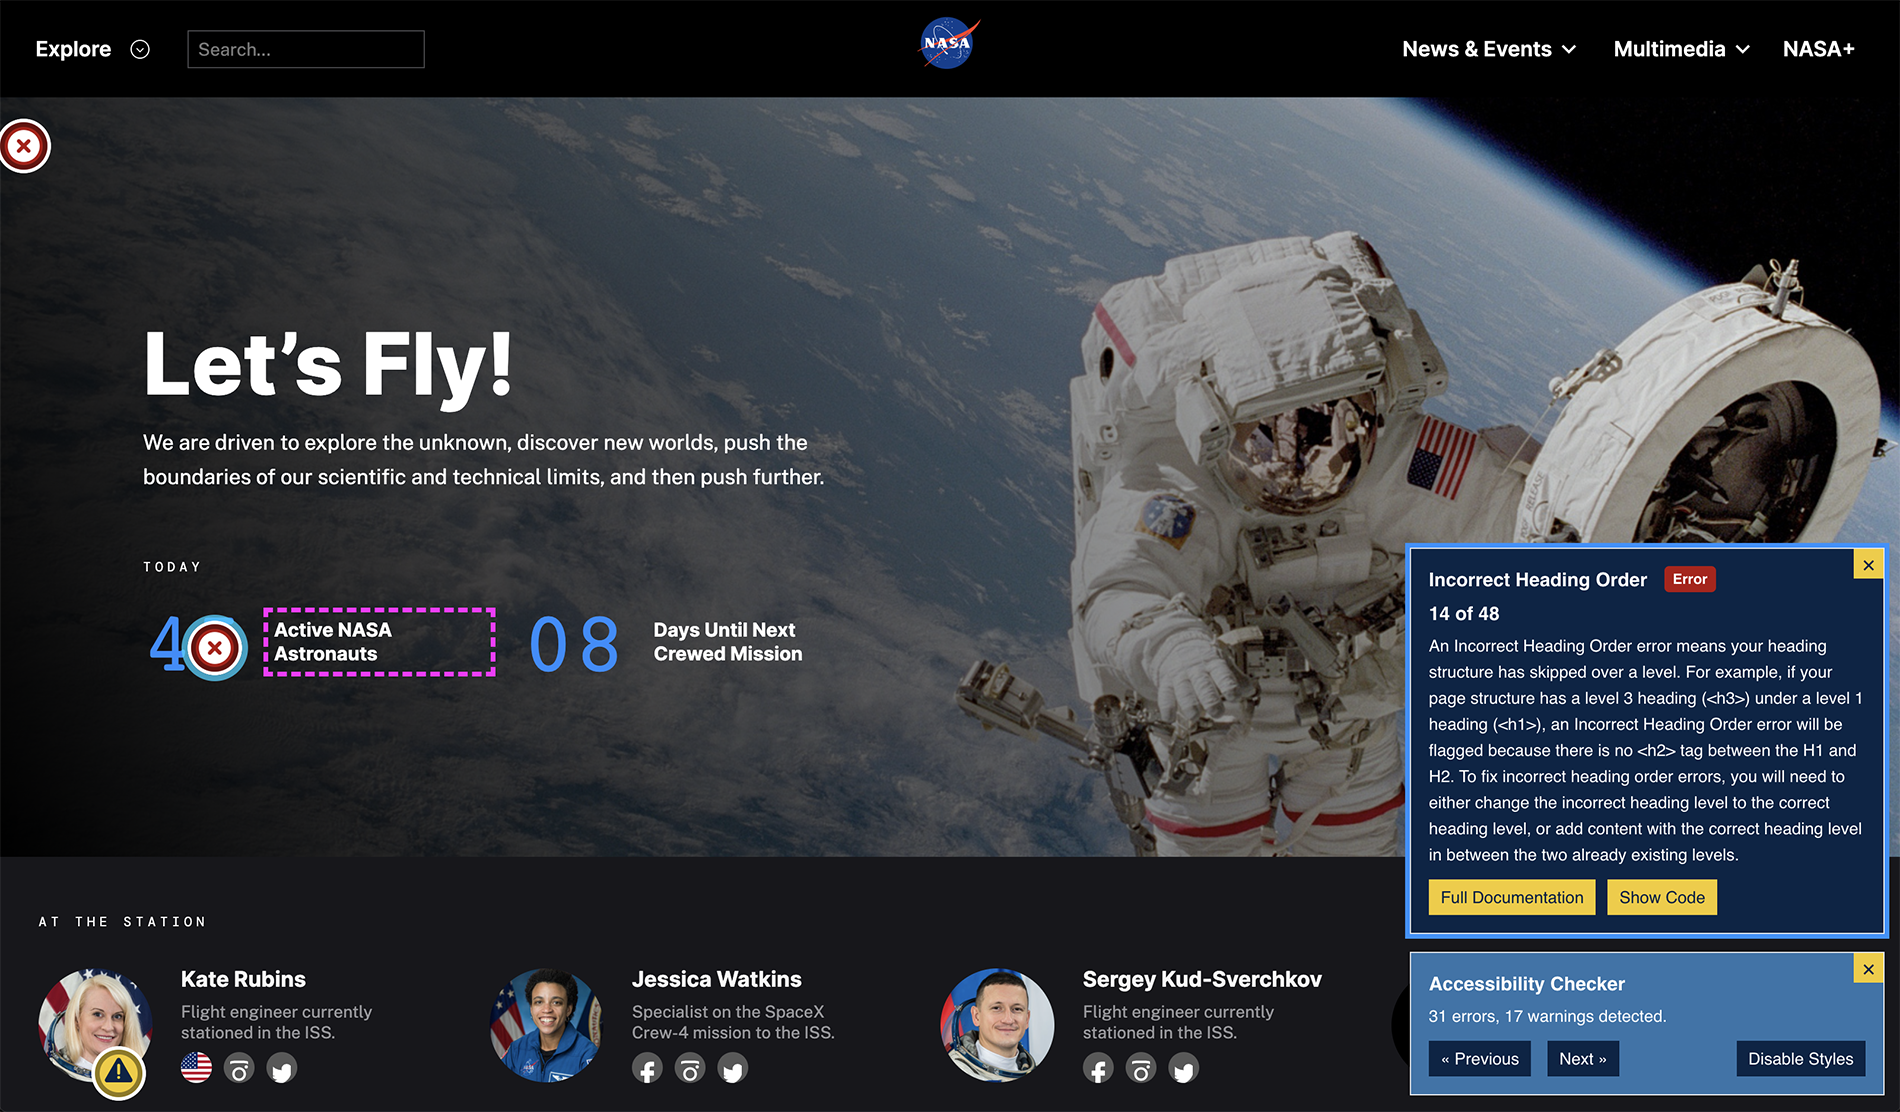 Accessibility problems can be viewed on the front end of the website, as shown on the NASA website.